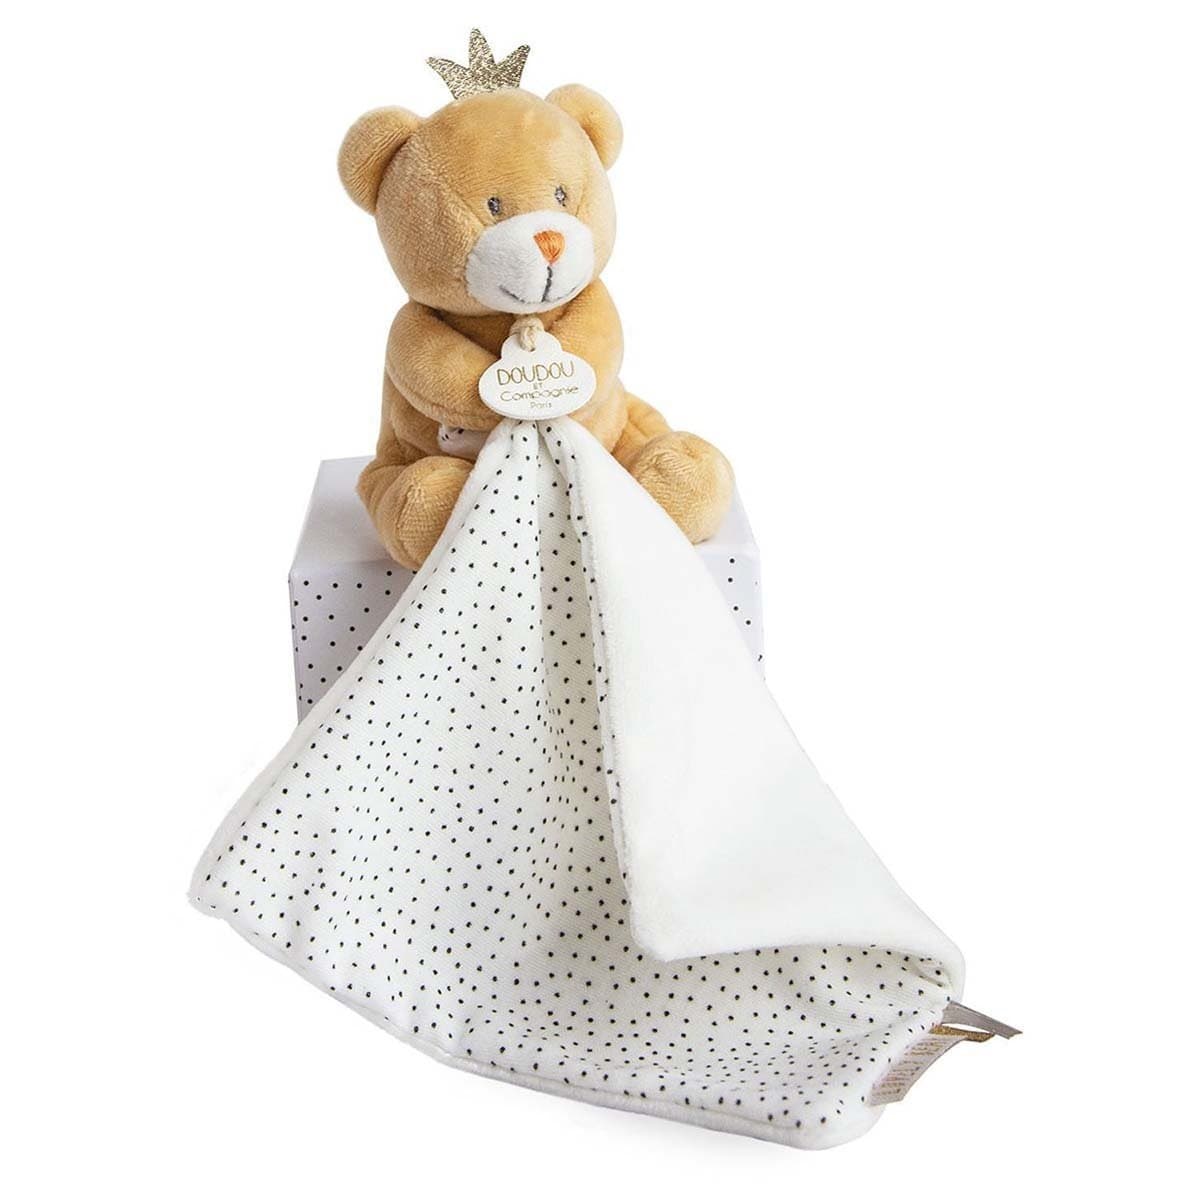 Little King Bear with Doudou